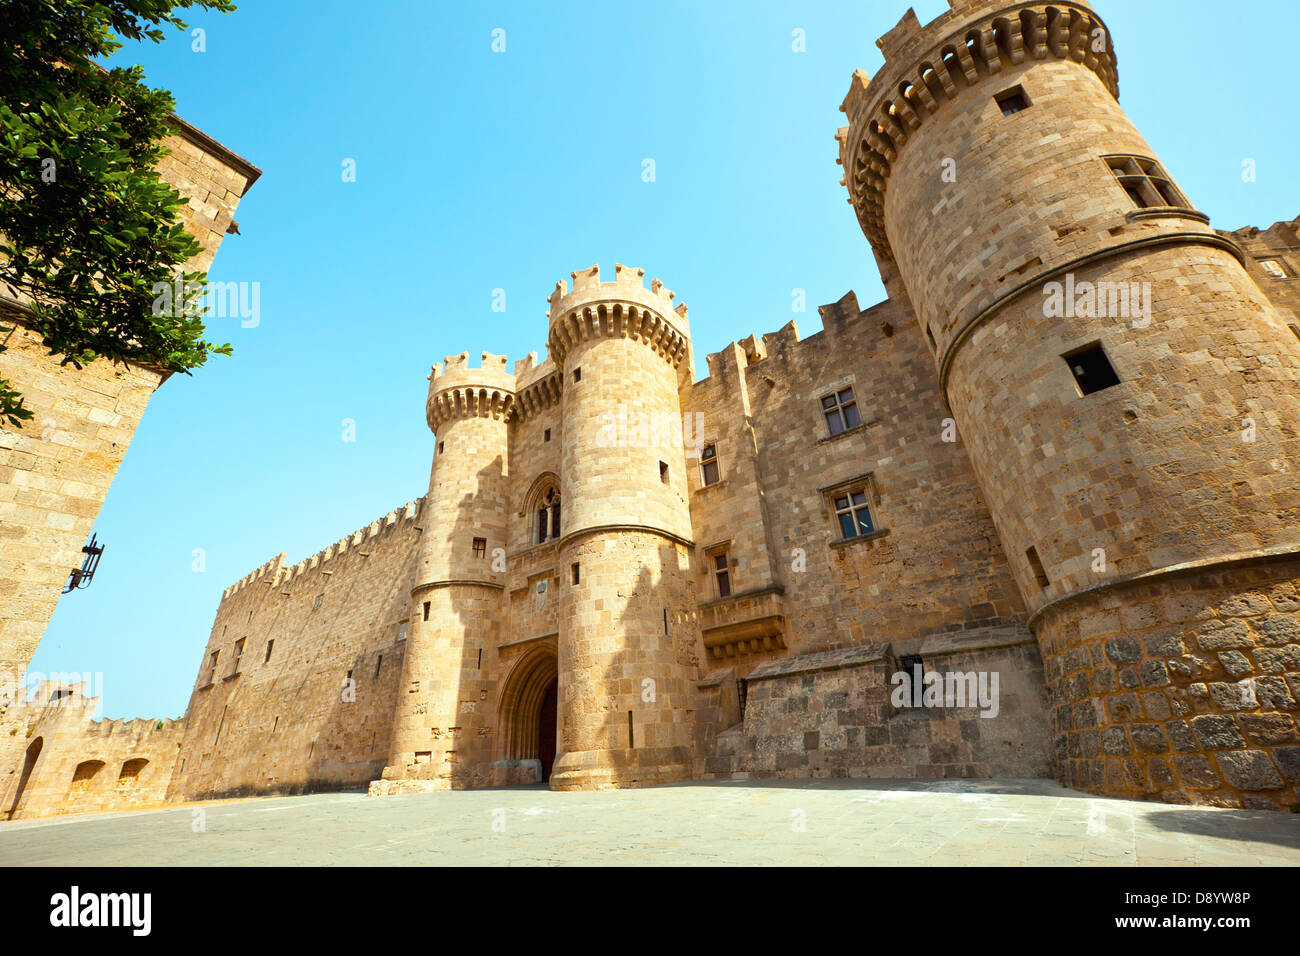 Rhodes Island, Greece, a symbol of Rhodes, of the famous Knights Grand Master Palace (also known as Castello). Stock Photo